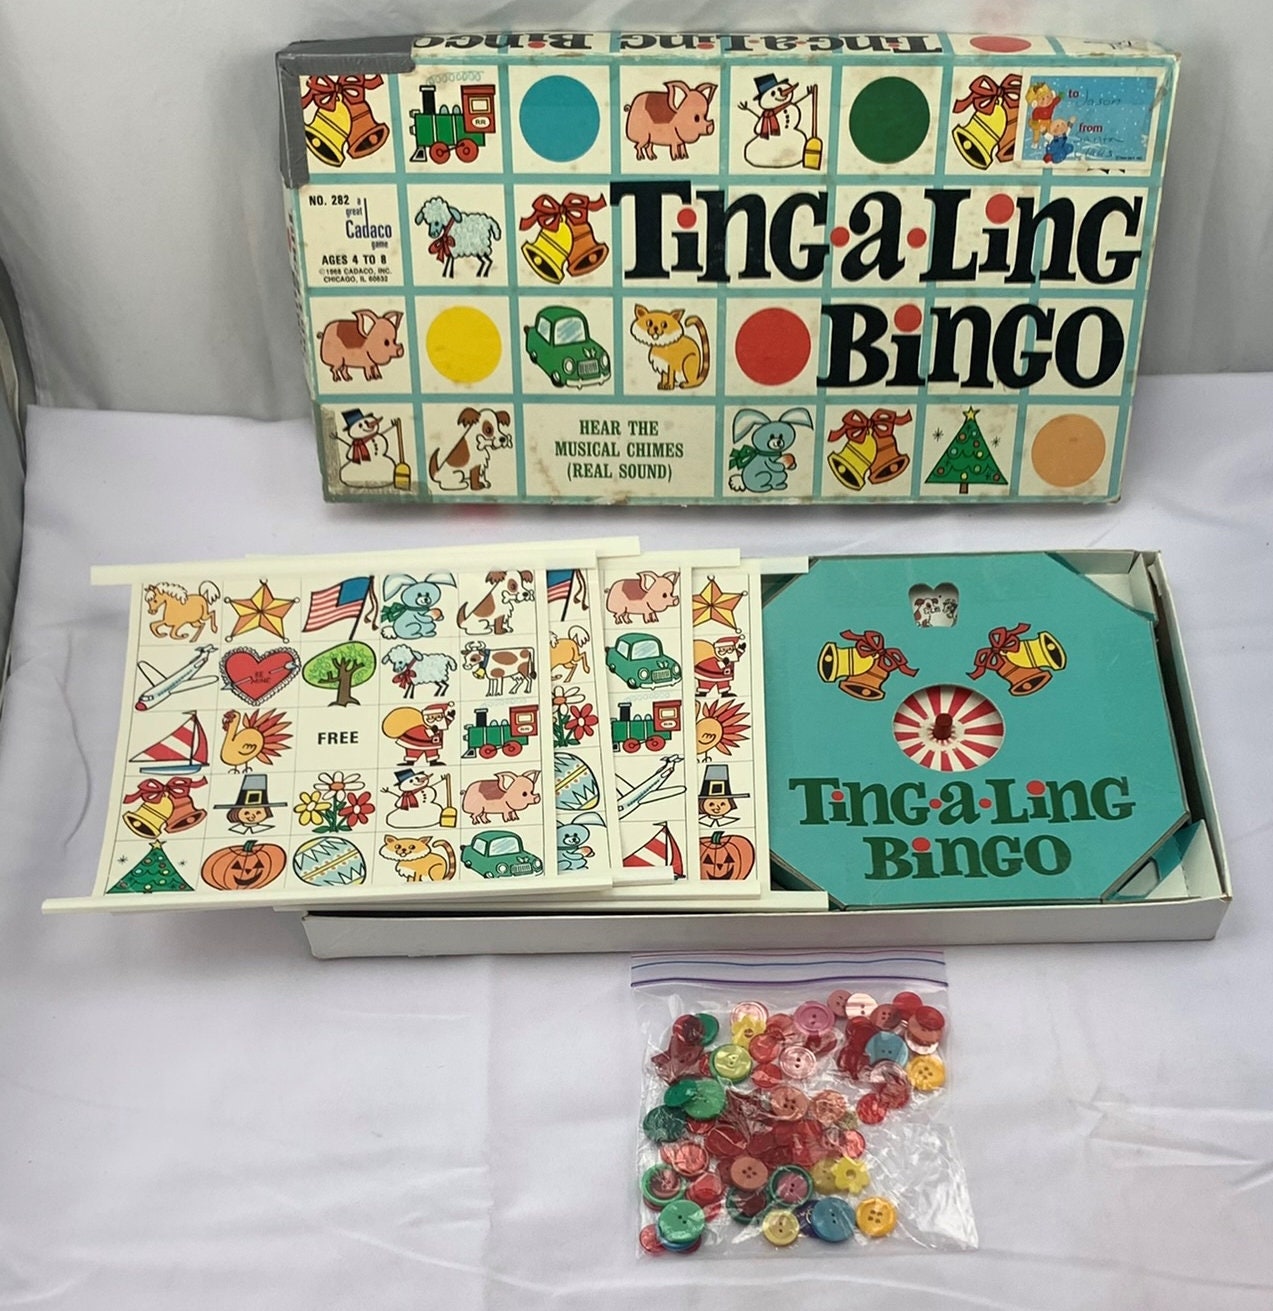 1969 Don't Break the Ice Game by Schaper in Good Condition FREE SHIPPING 